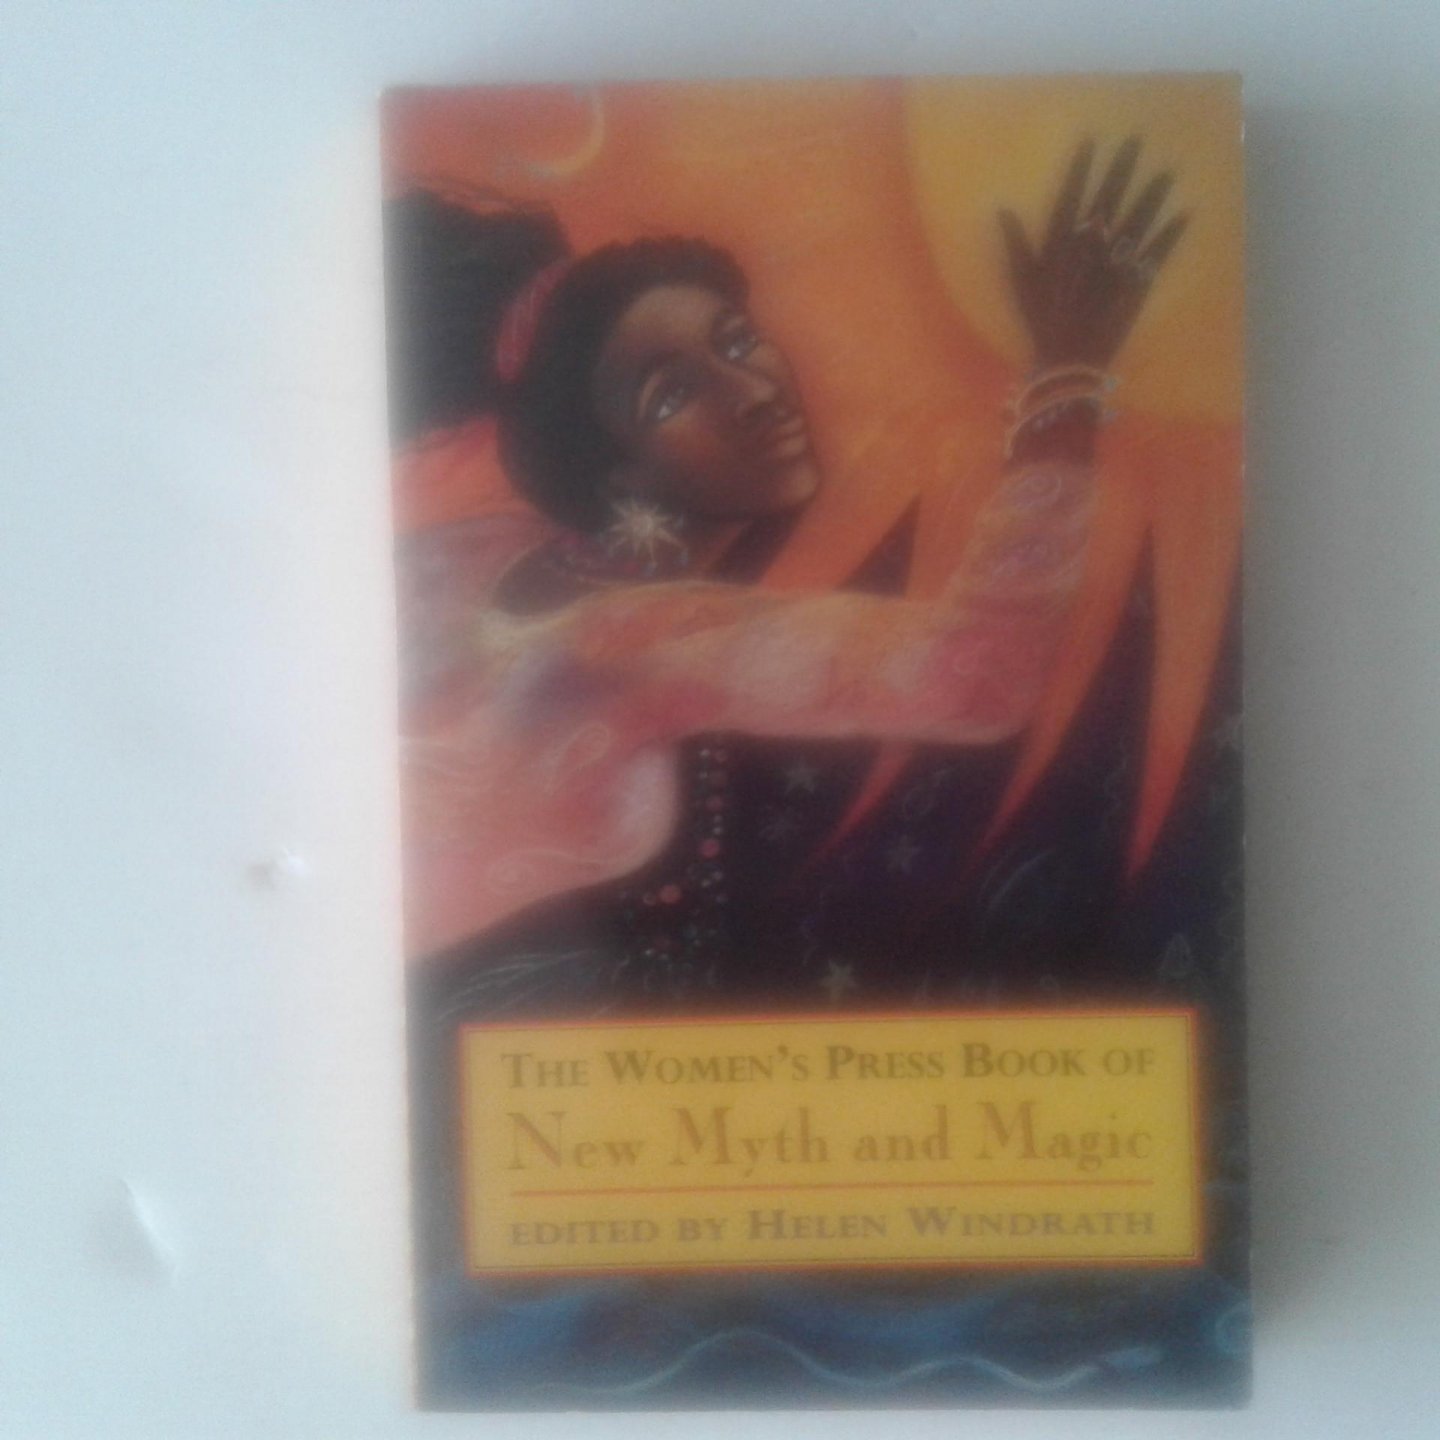 Windrath, Helen - New Myth and Magic ; The Women's Press Book of New Myth and Magic